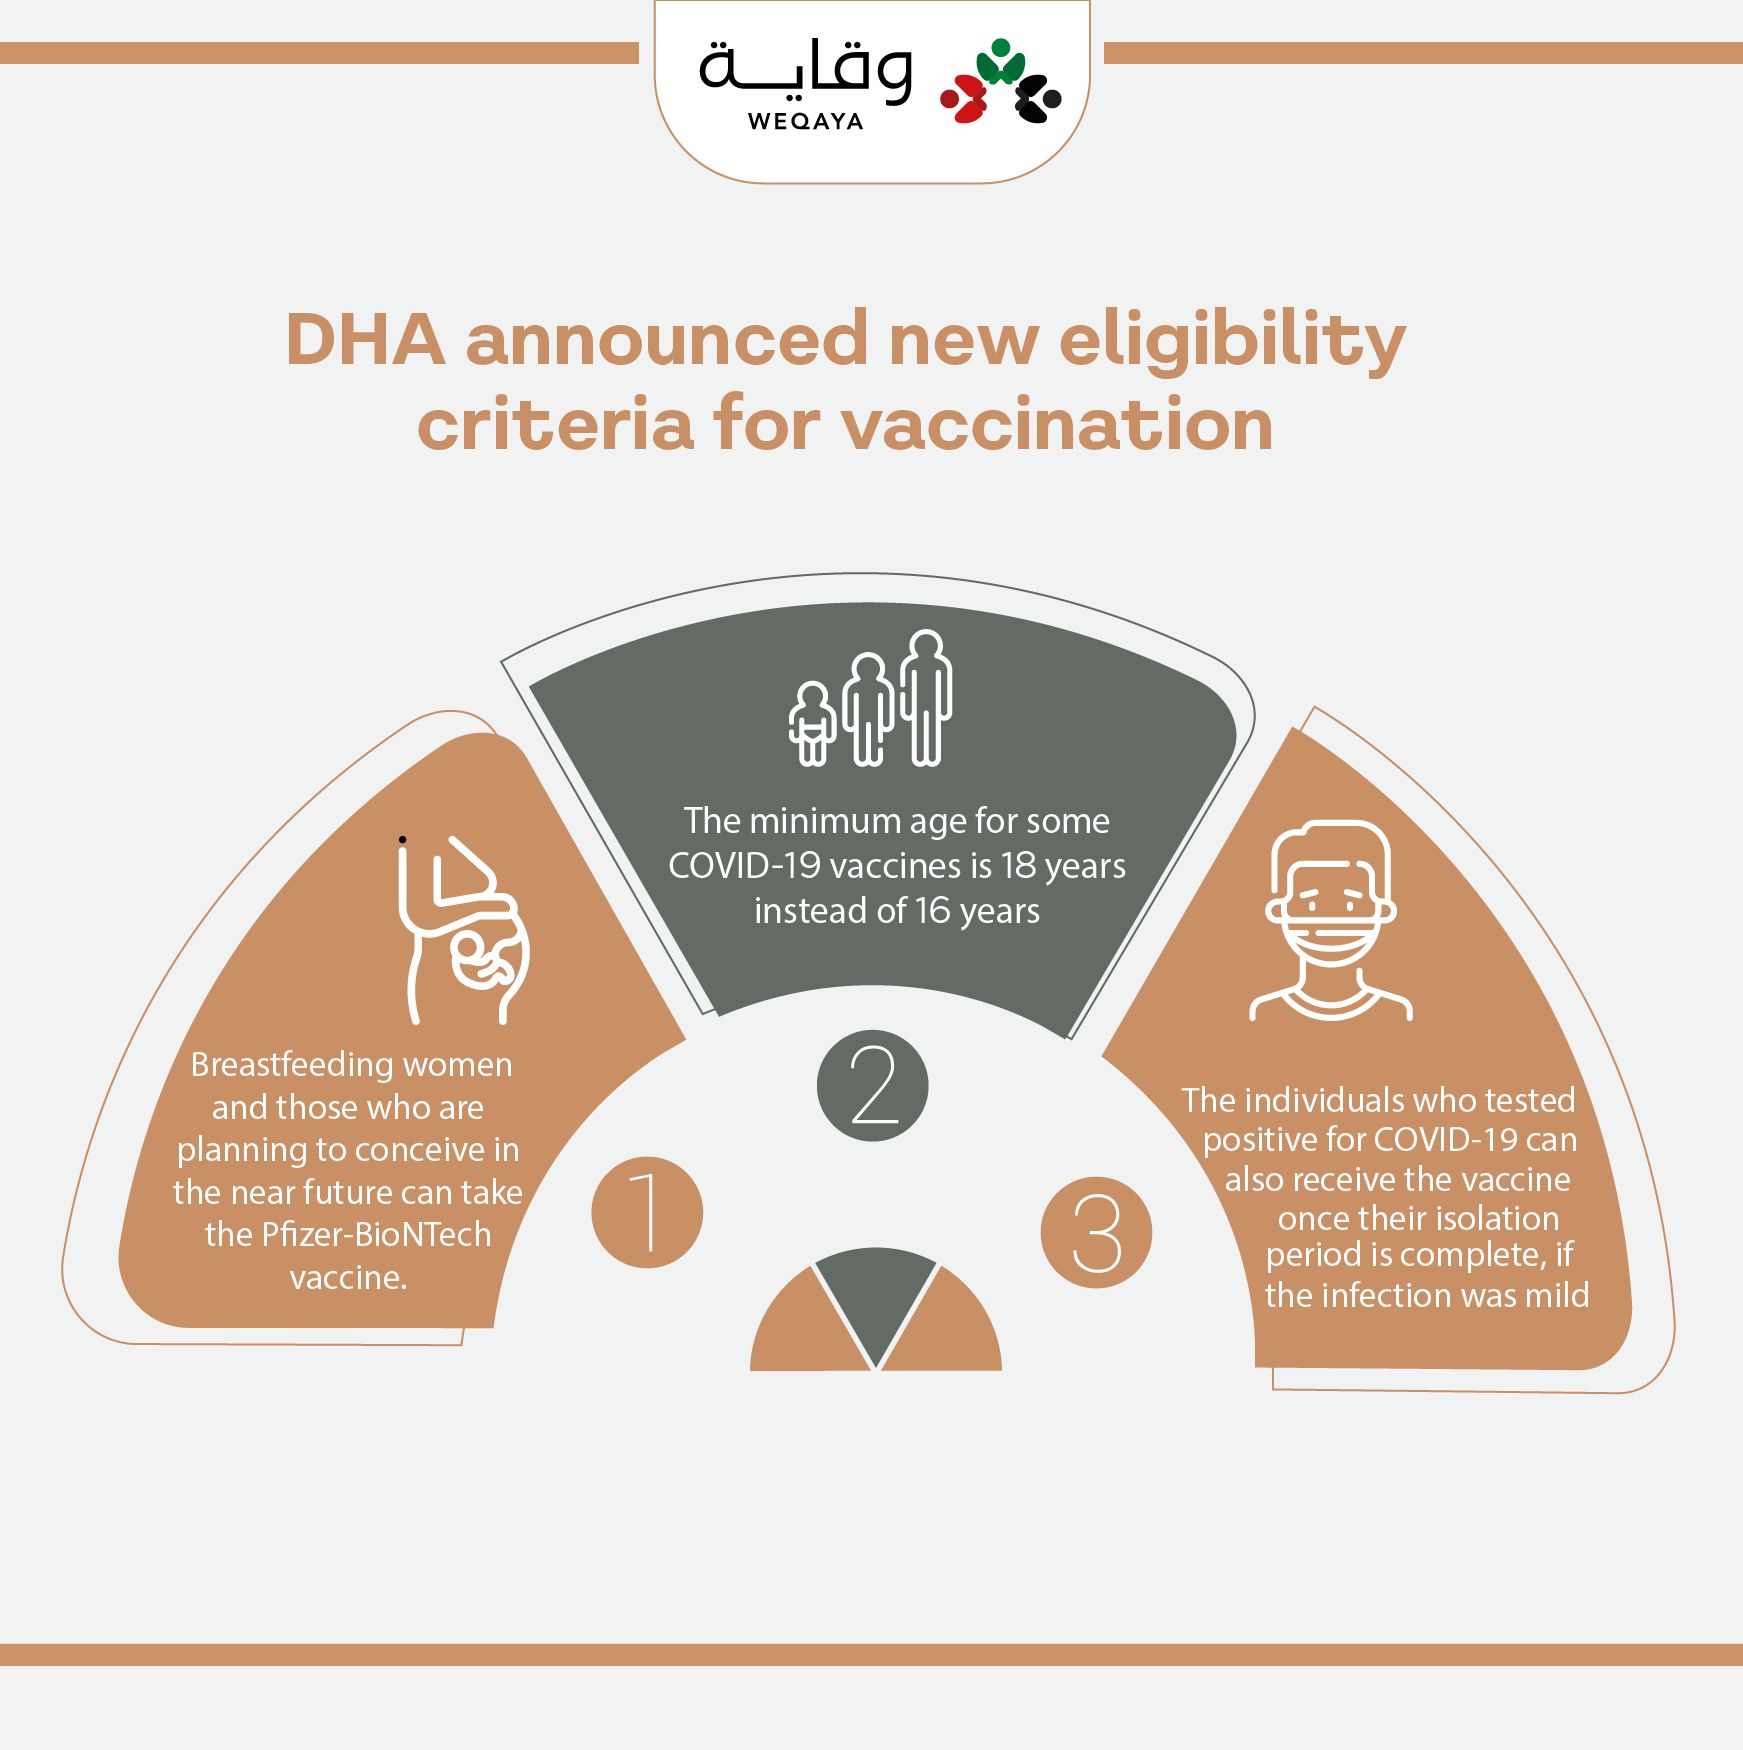 DHA announces new eligibility criteria for vaccinations